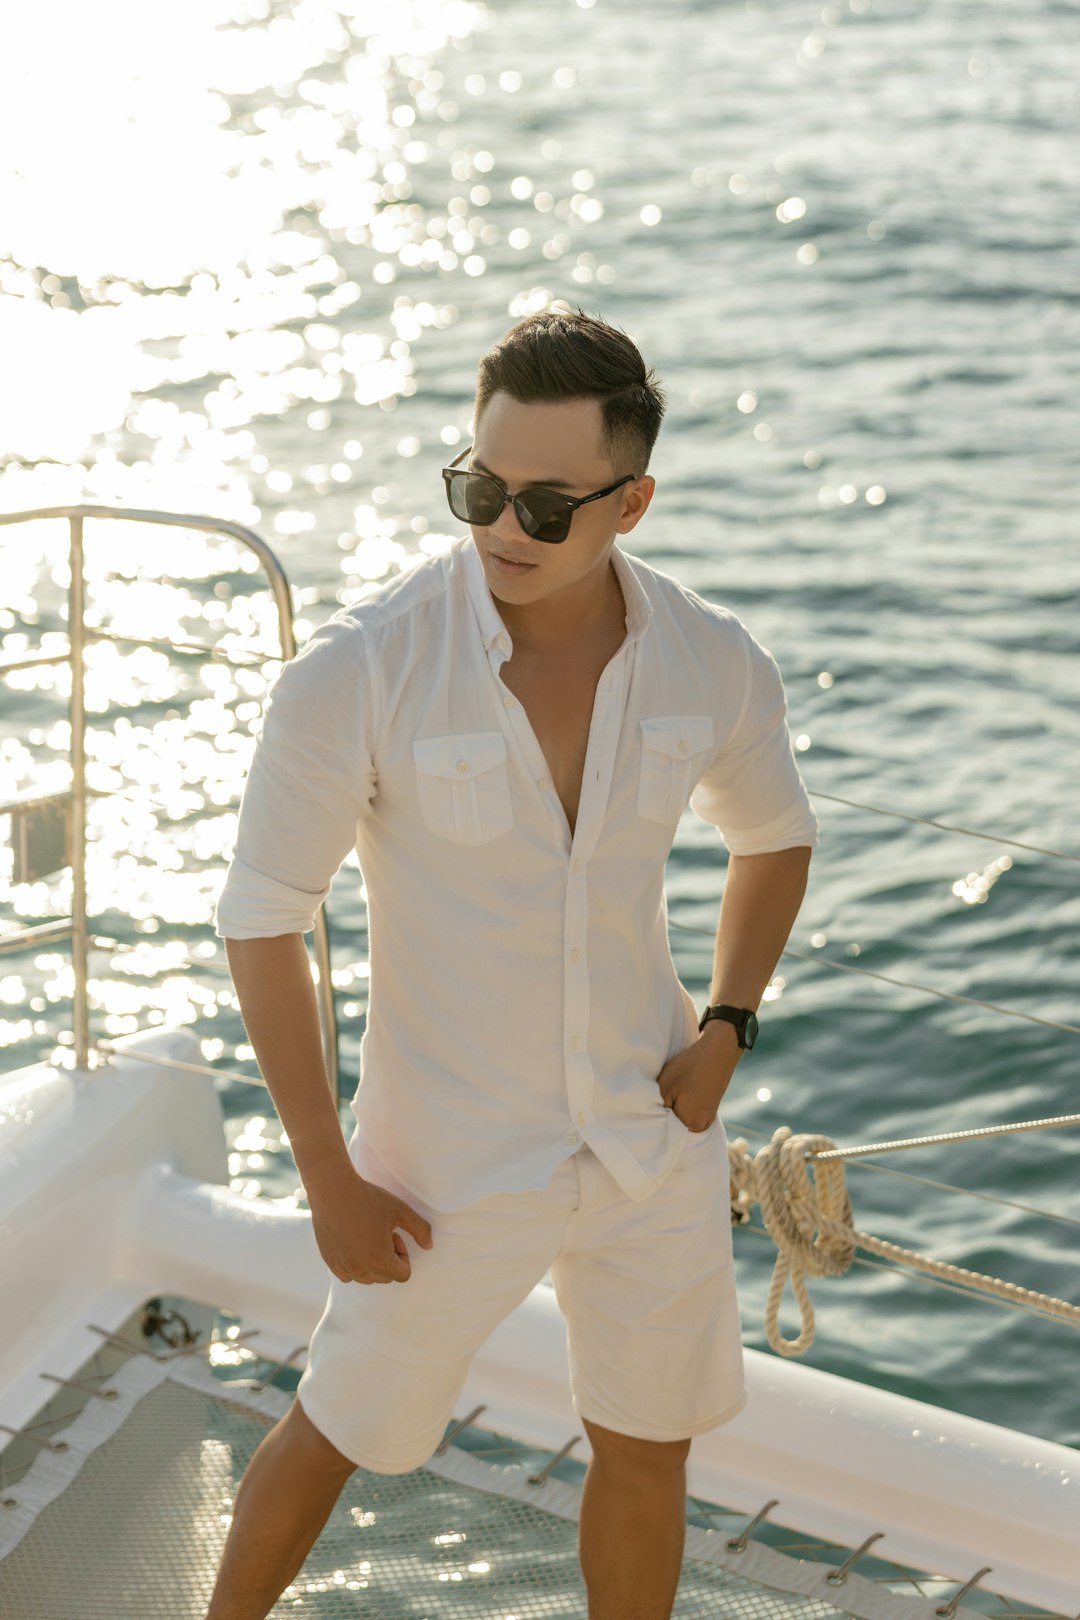 woman in white button up shirt wearing black sunglasses standing on white boat during daytime